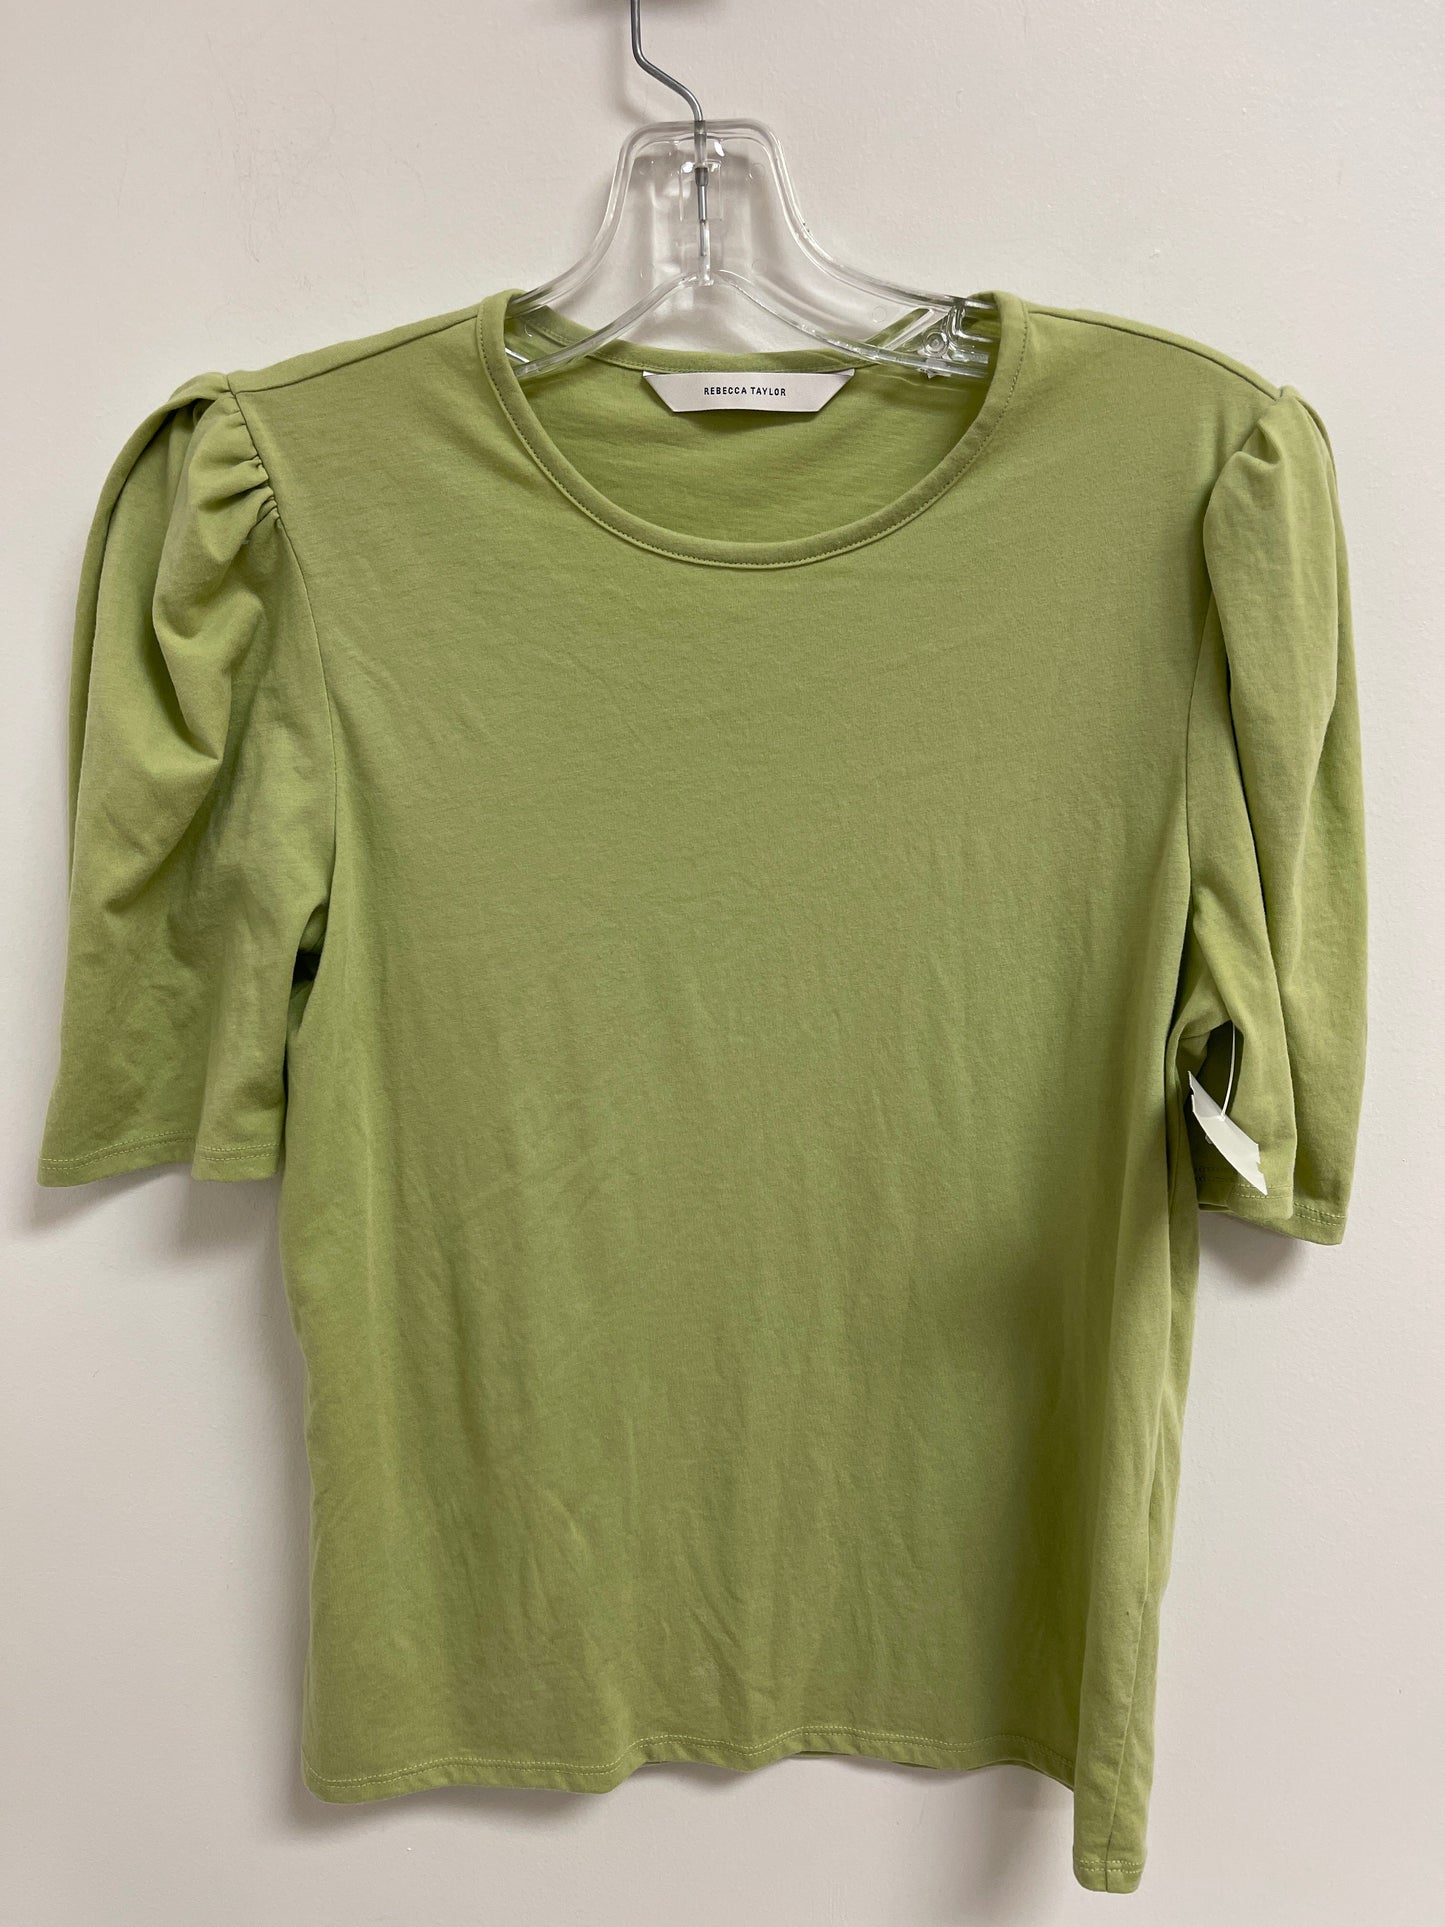 Green Top Short Sleeve Rebecca Taylor, Size S